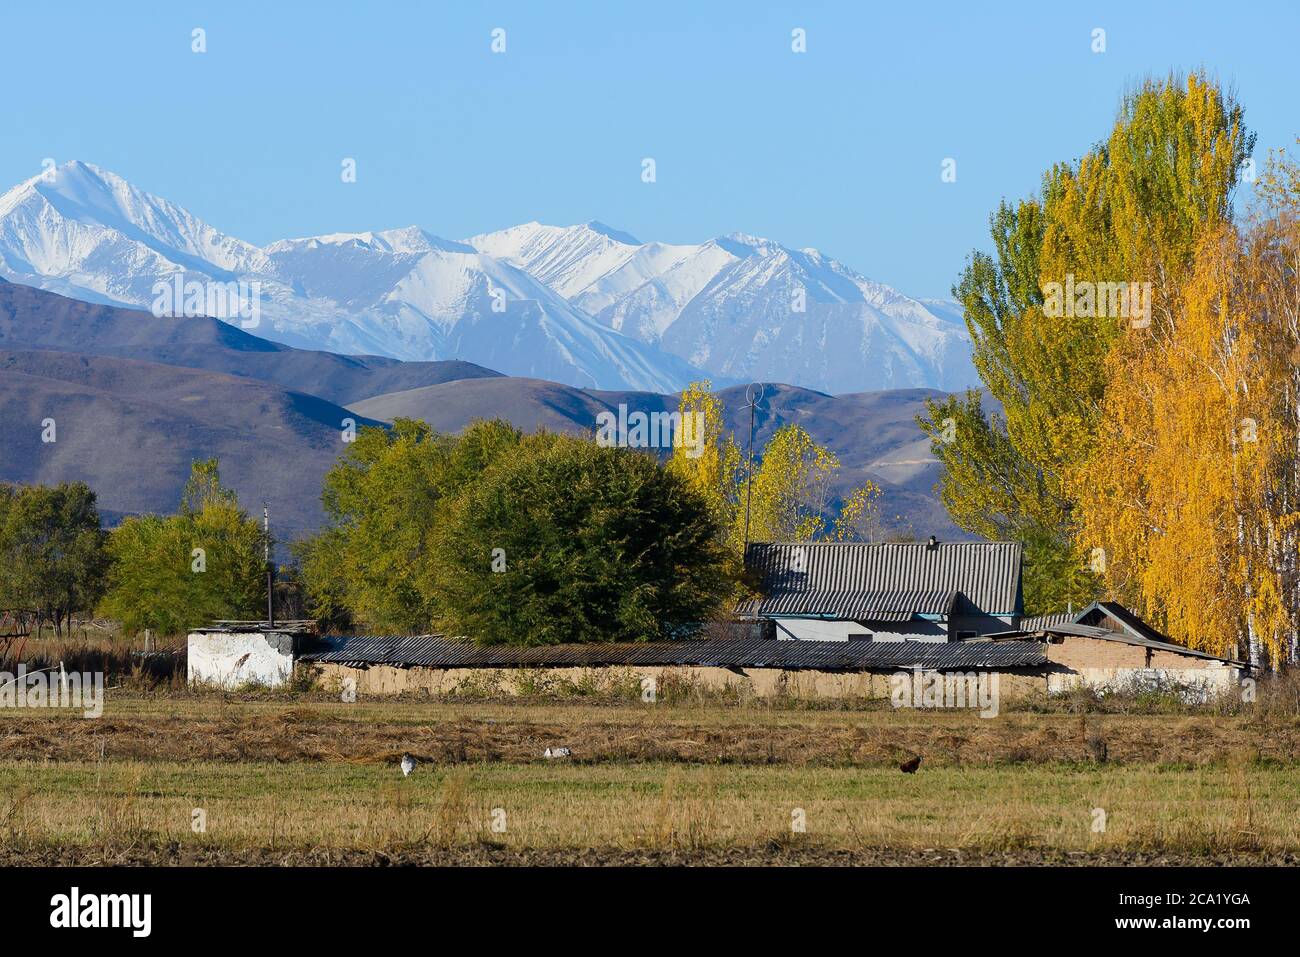 Countryside Kyrgyzstan in Central Asia with snow capped mountains behind. Rural area with mountain range with snow behind. Sunny day in fall season. Stock Photo